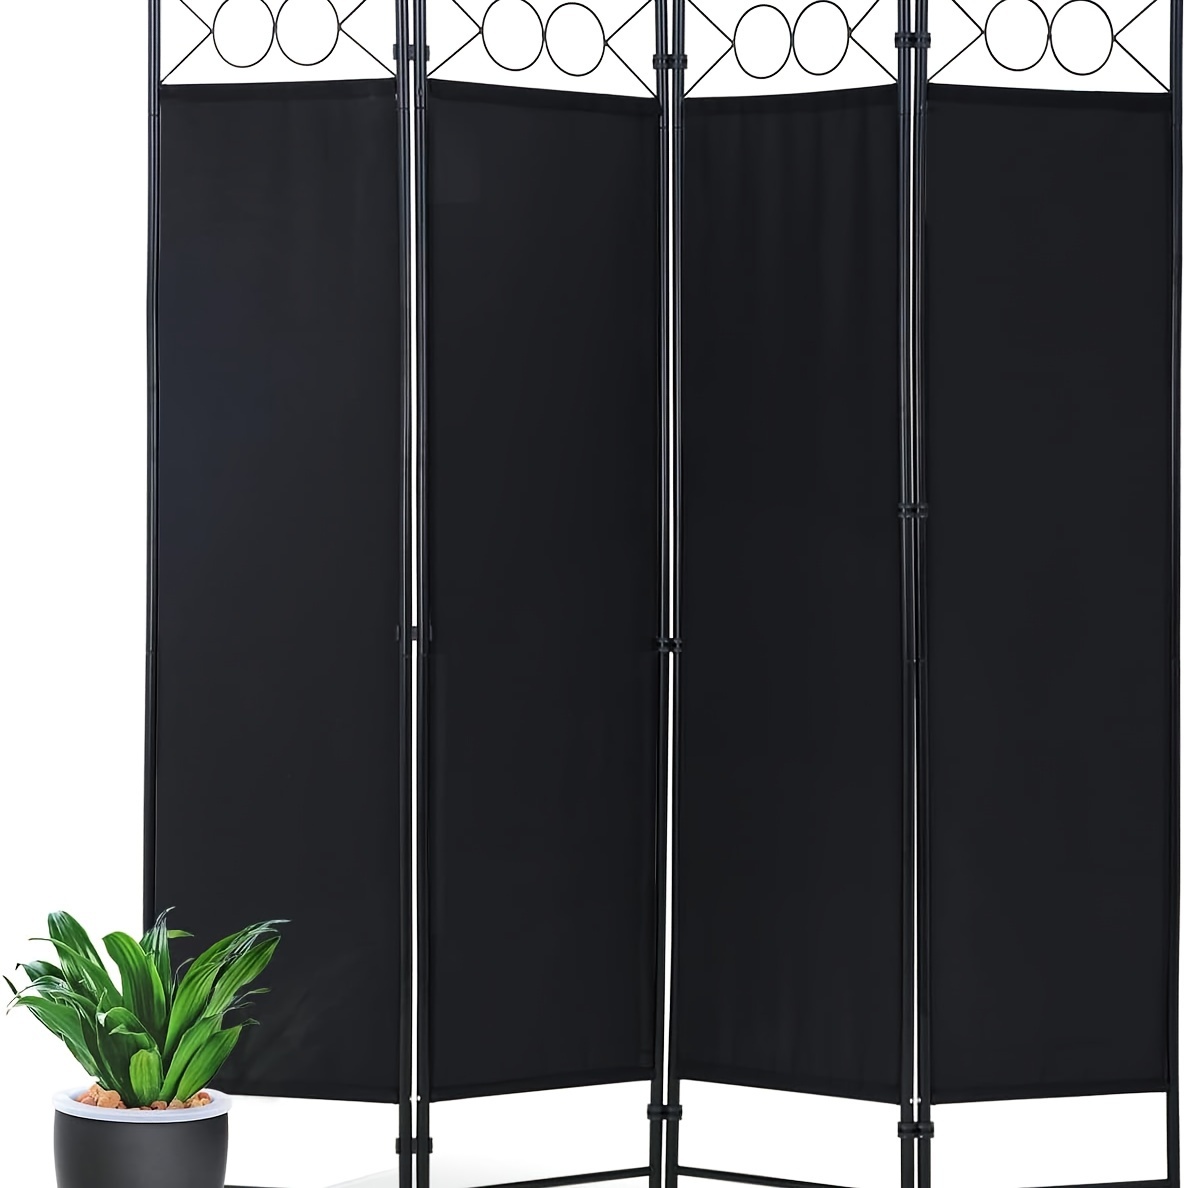 

Room Divider, Folding Privacy Screen 4 Panels Portable Wall Divider Partition Room Dividers For Home Office Room Separation